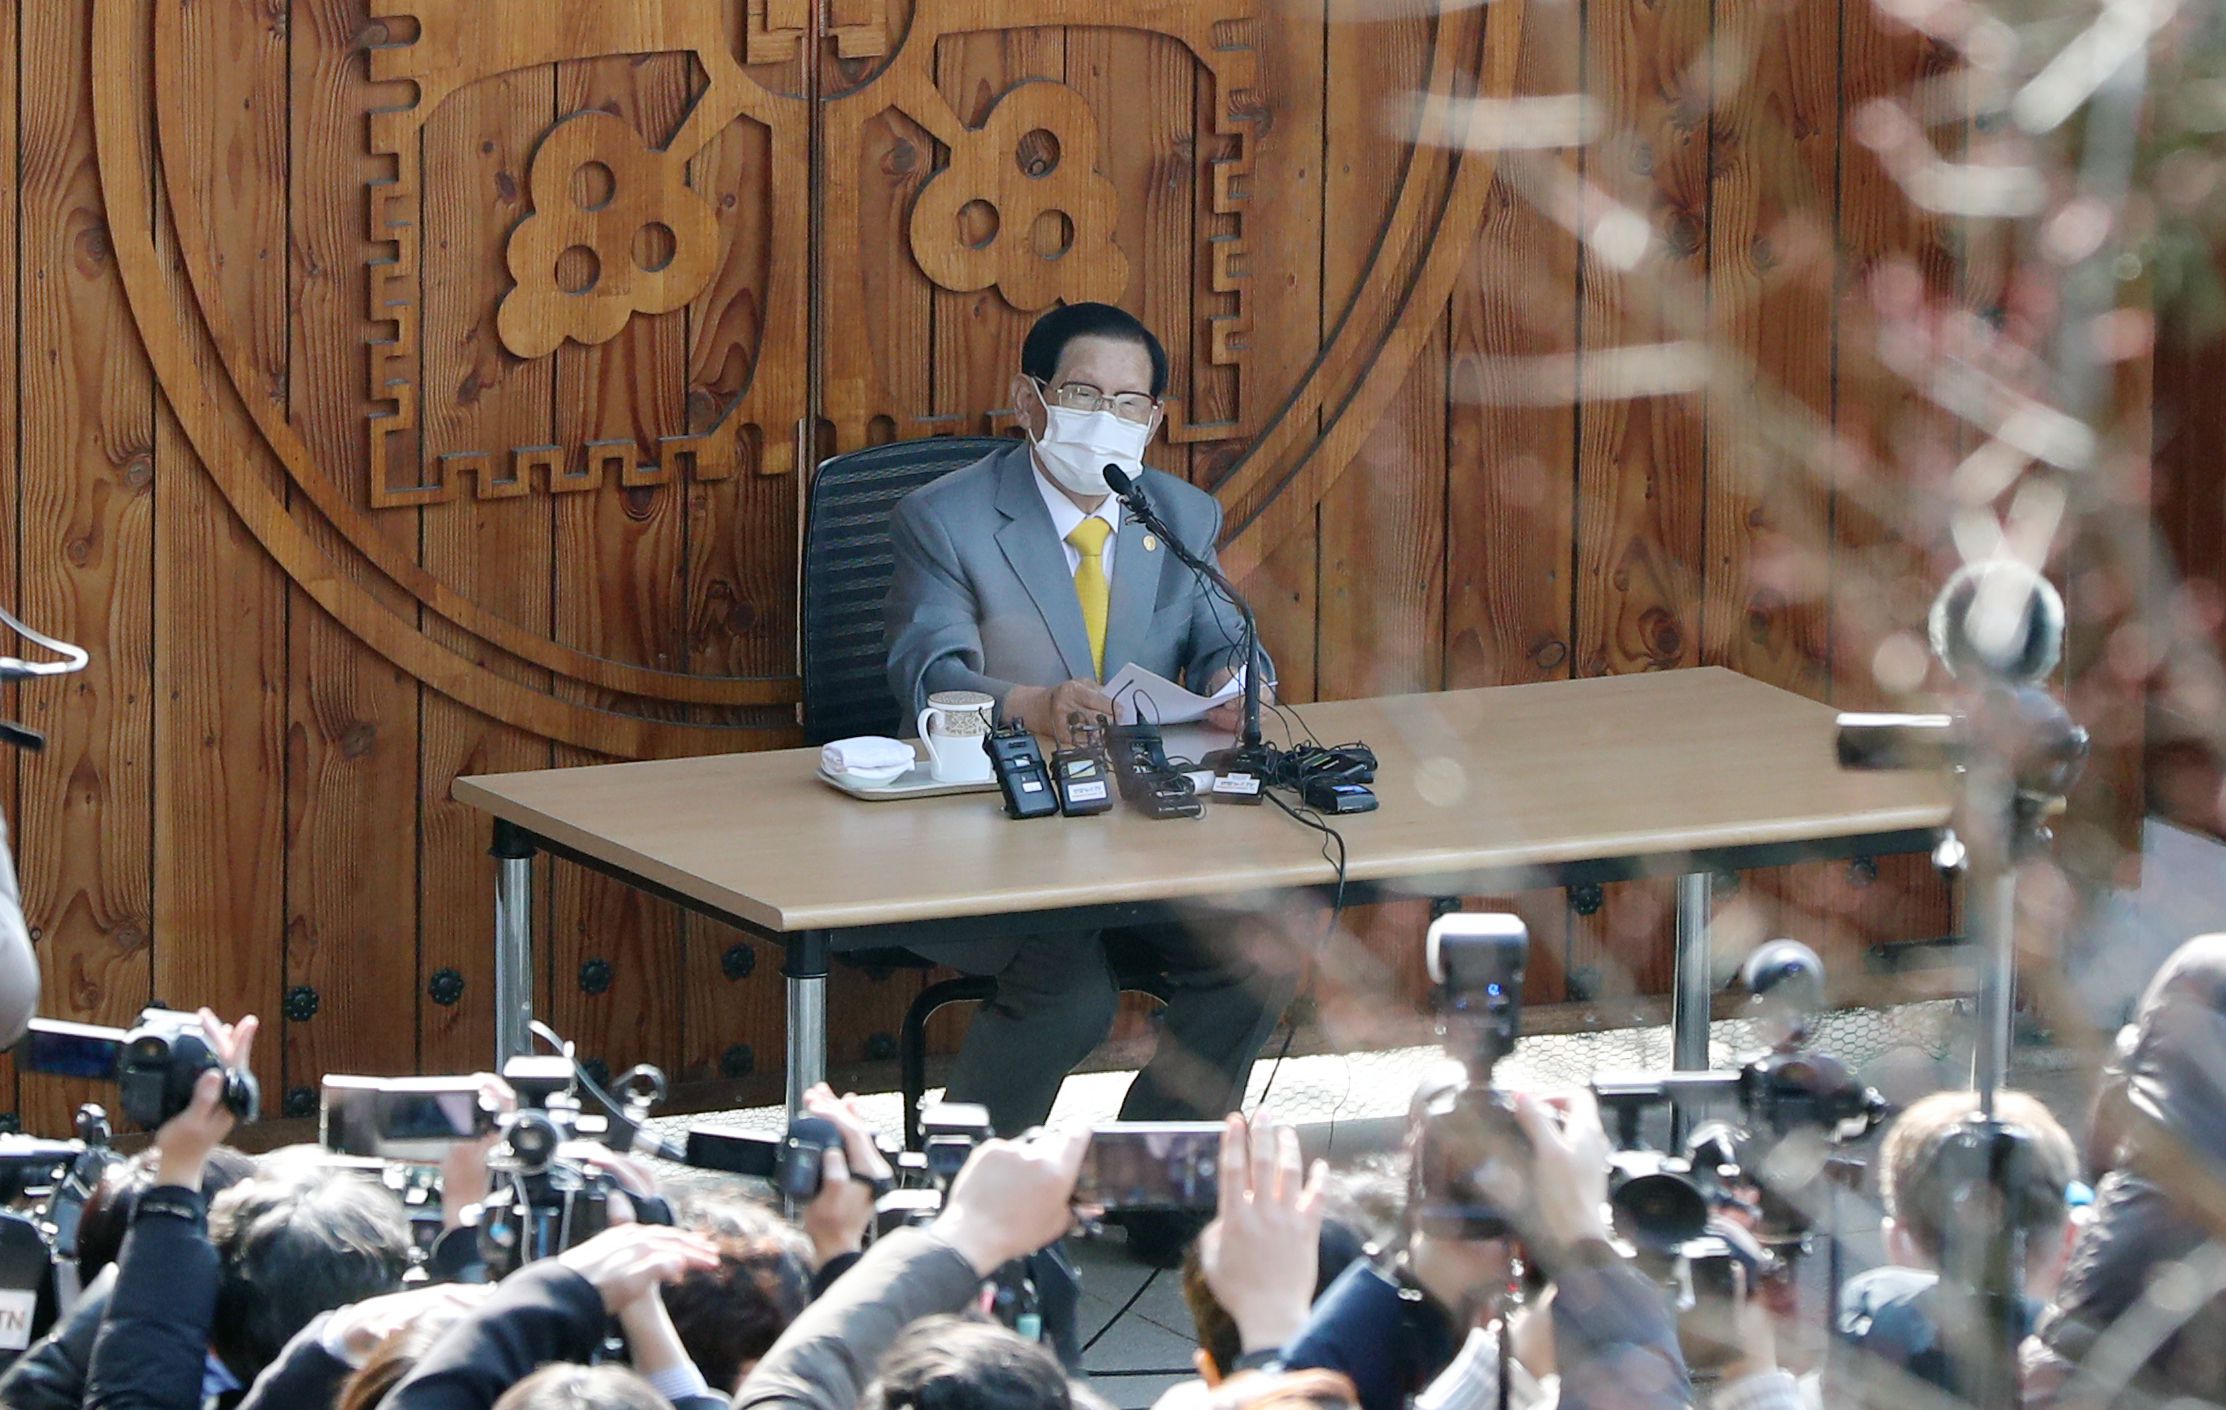 02/03/2020 02 March 2020, South Korea, Gapyeong: Lee Man-hee, founder and leader of the Shincheonji Church of Jesus, Temple of the Tabernacle of the Testimony, holds a news conference at his villa after the religious sect has been at the center of the coronavirus outbreak. Photo: -/YNA/dpa POLITICA INTERNACIONAL -/YNA/dpa 